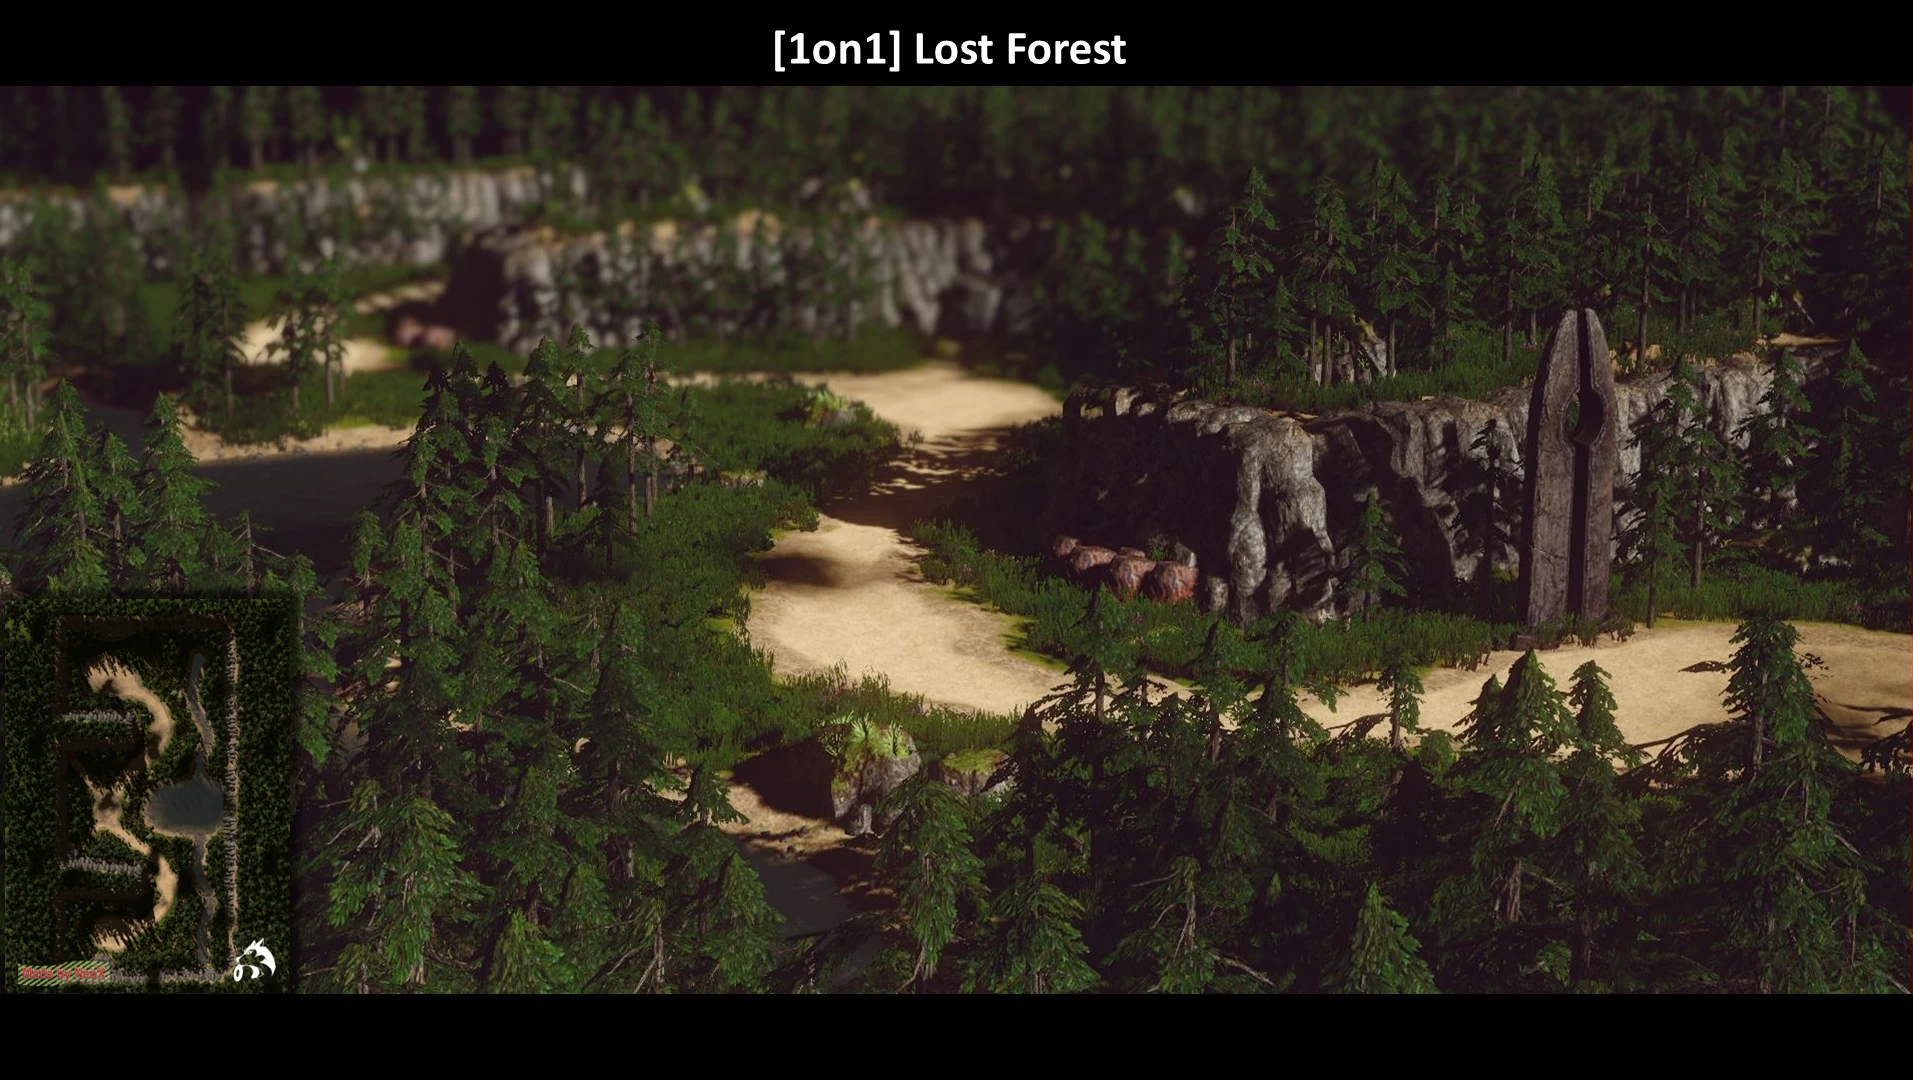 mod api wont detect the forest